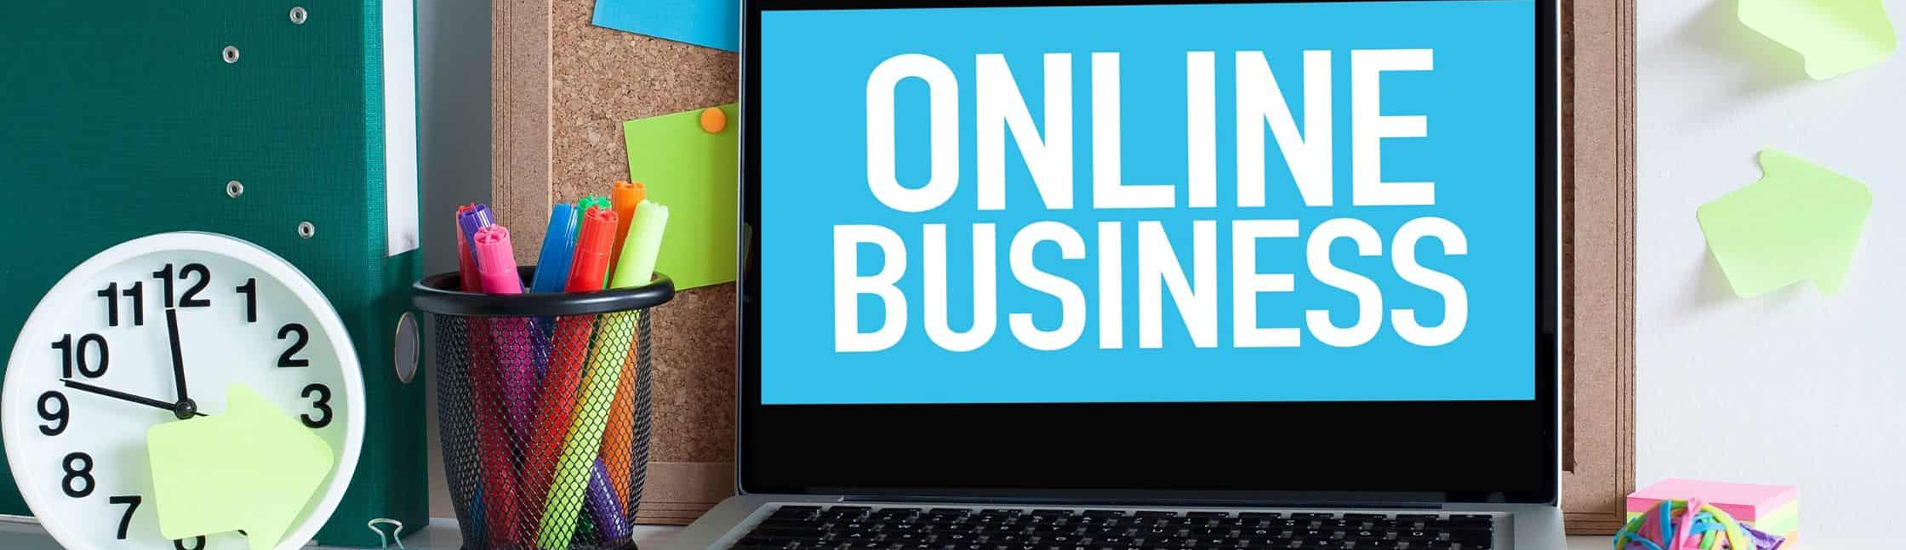 Your Comprehensive & Definitive Guide To Online Business Development & Growth In 2022